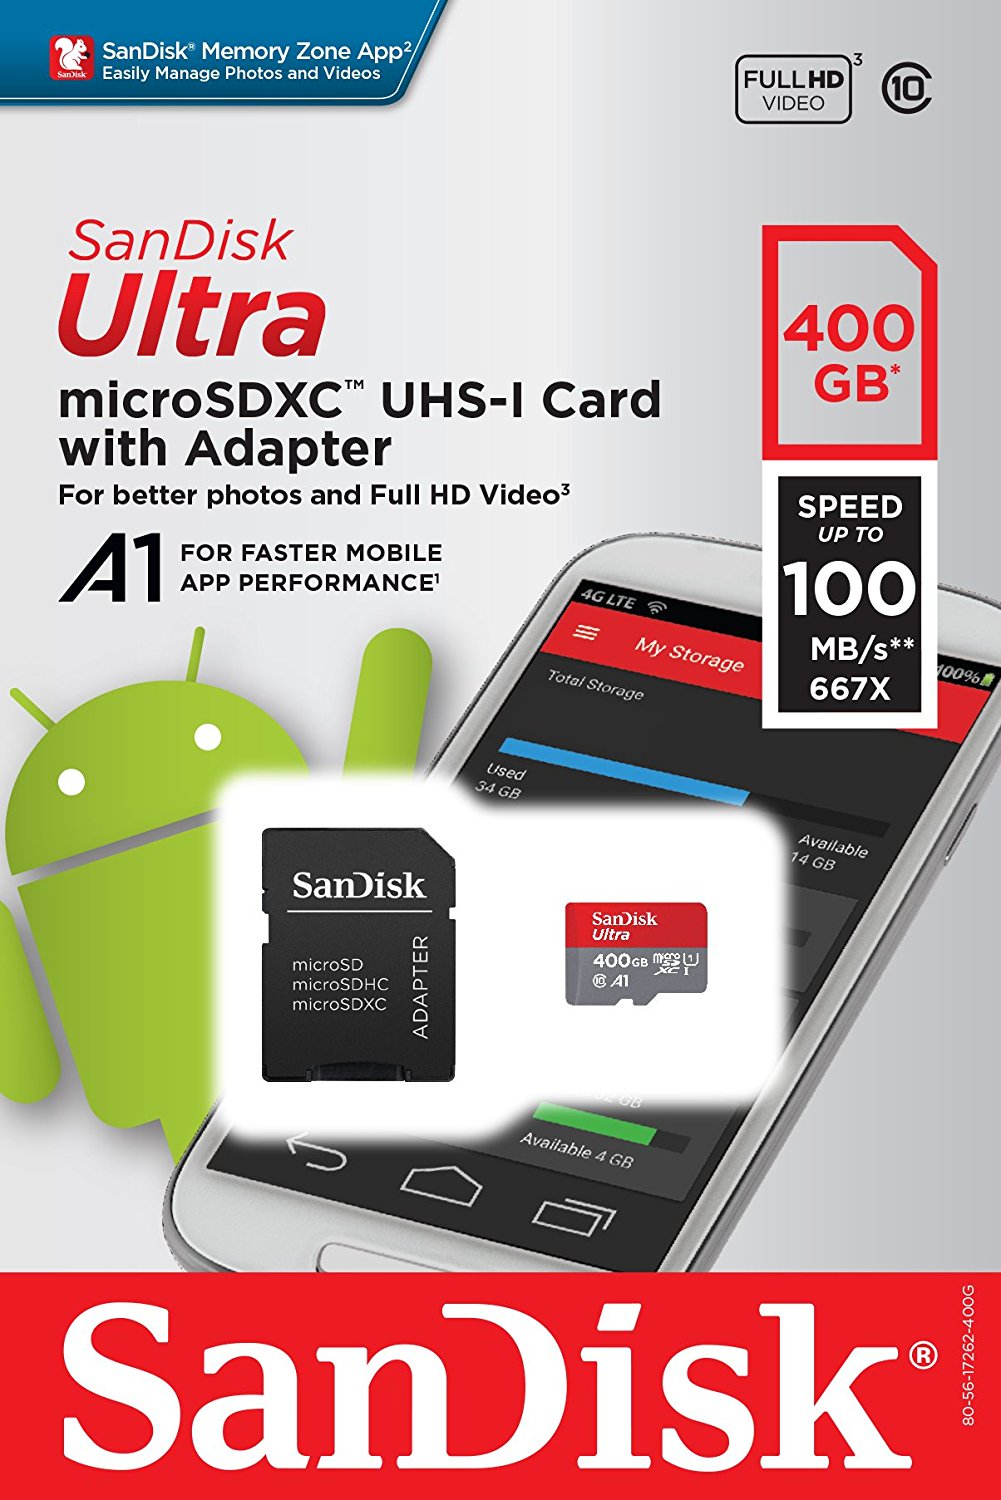 SanDisk microSD Cards On Sale for Up to 39% Off [Deal]